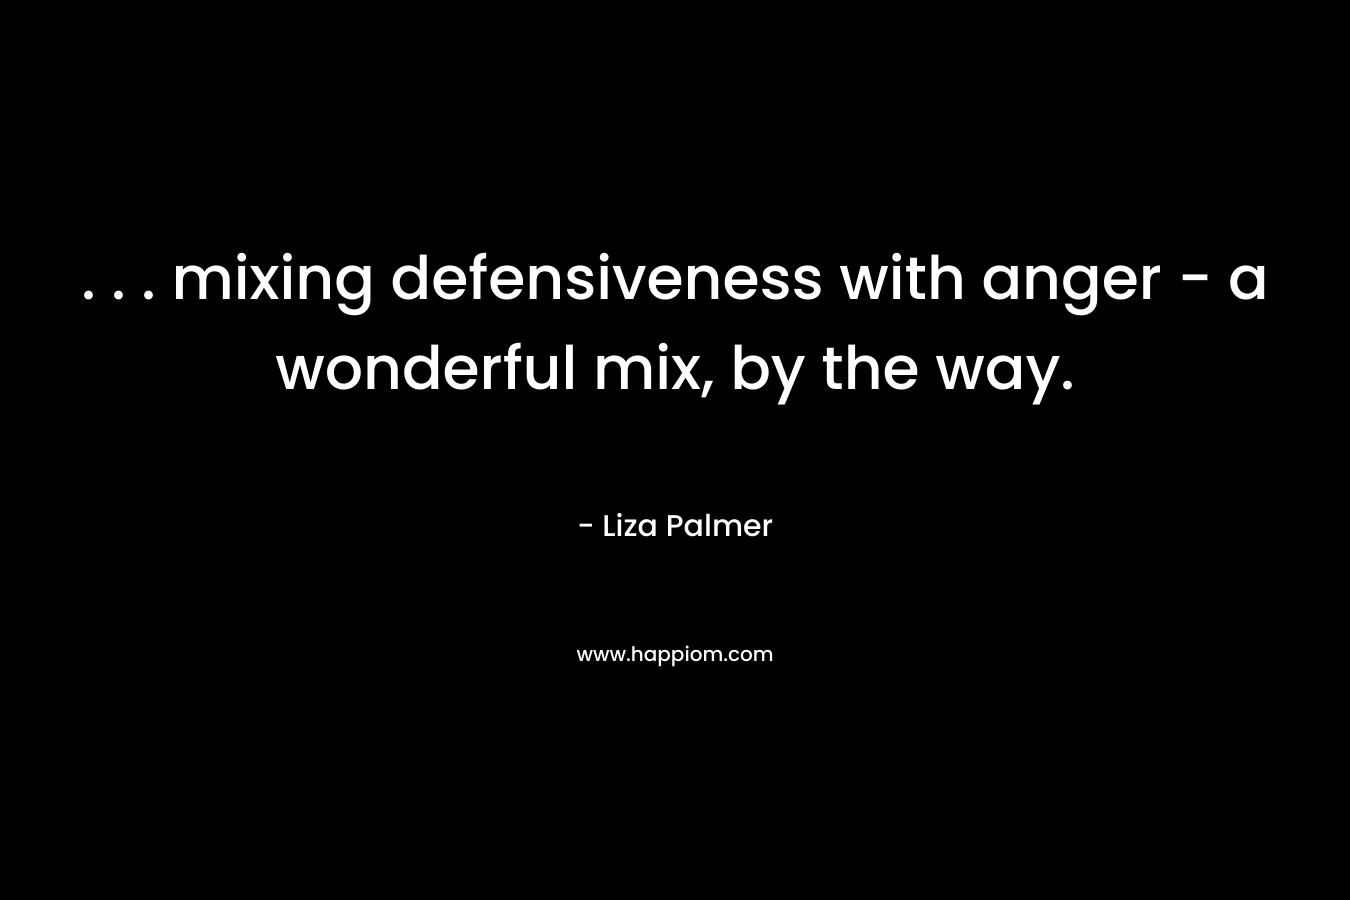 . . . mixing defensiveness with anger - a wonderful mix, by the way.